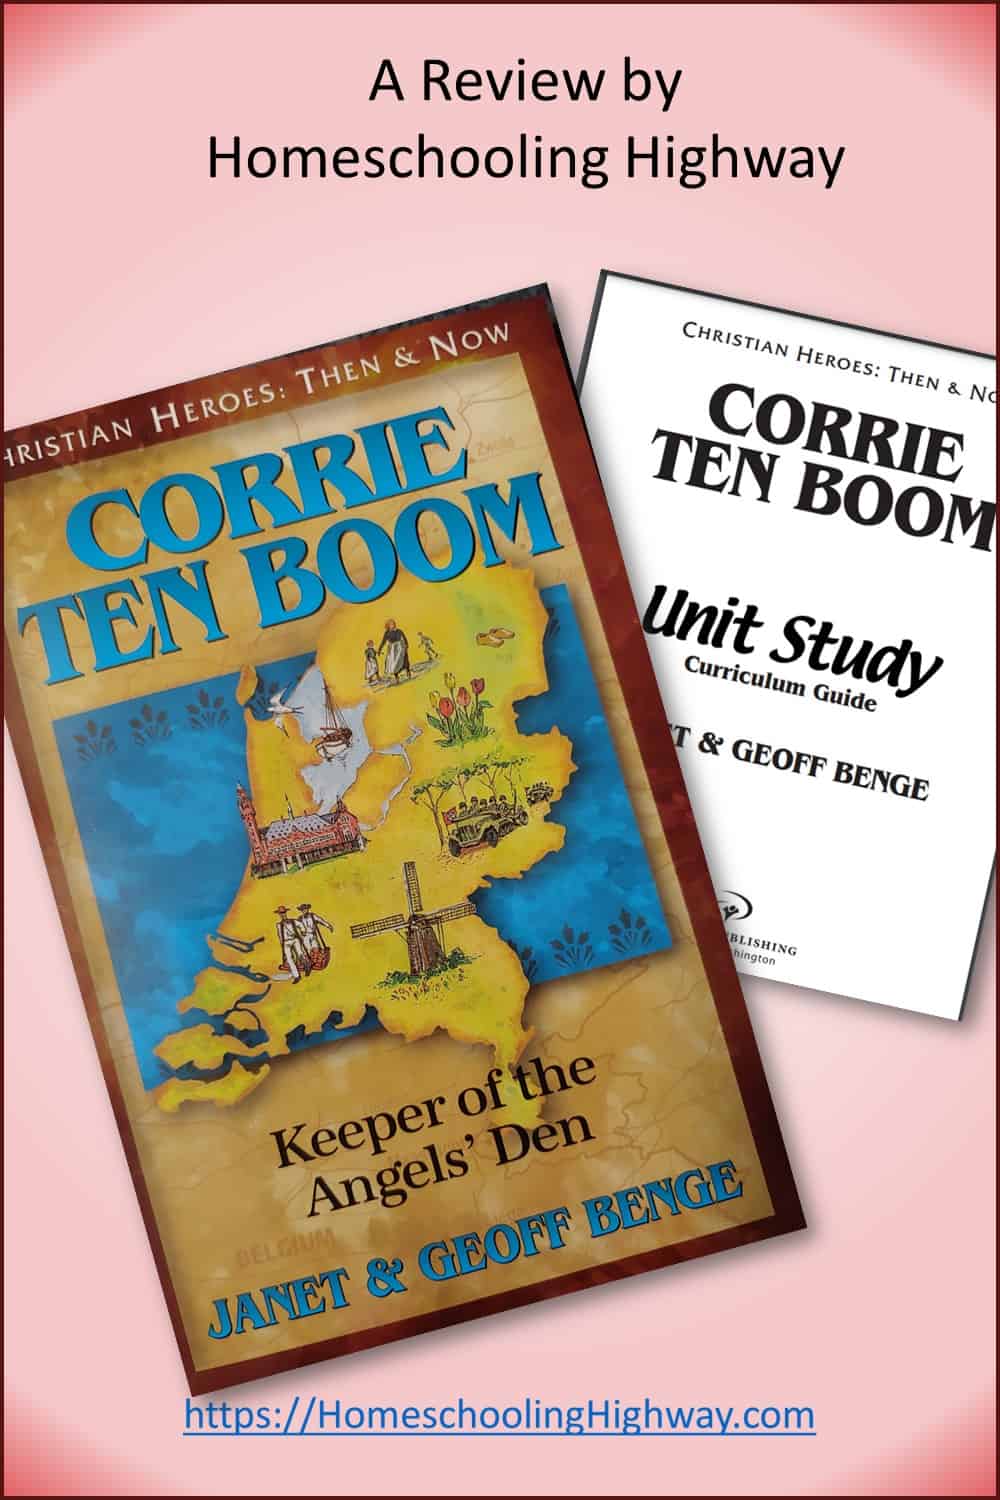 Corrie Ten Boom. Keeper of the Angels Den. A Review by Homeschooling Highway